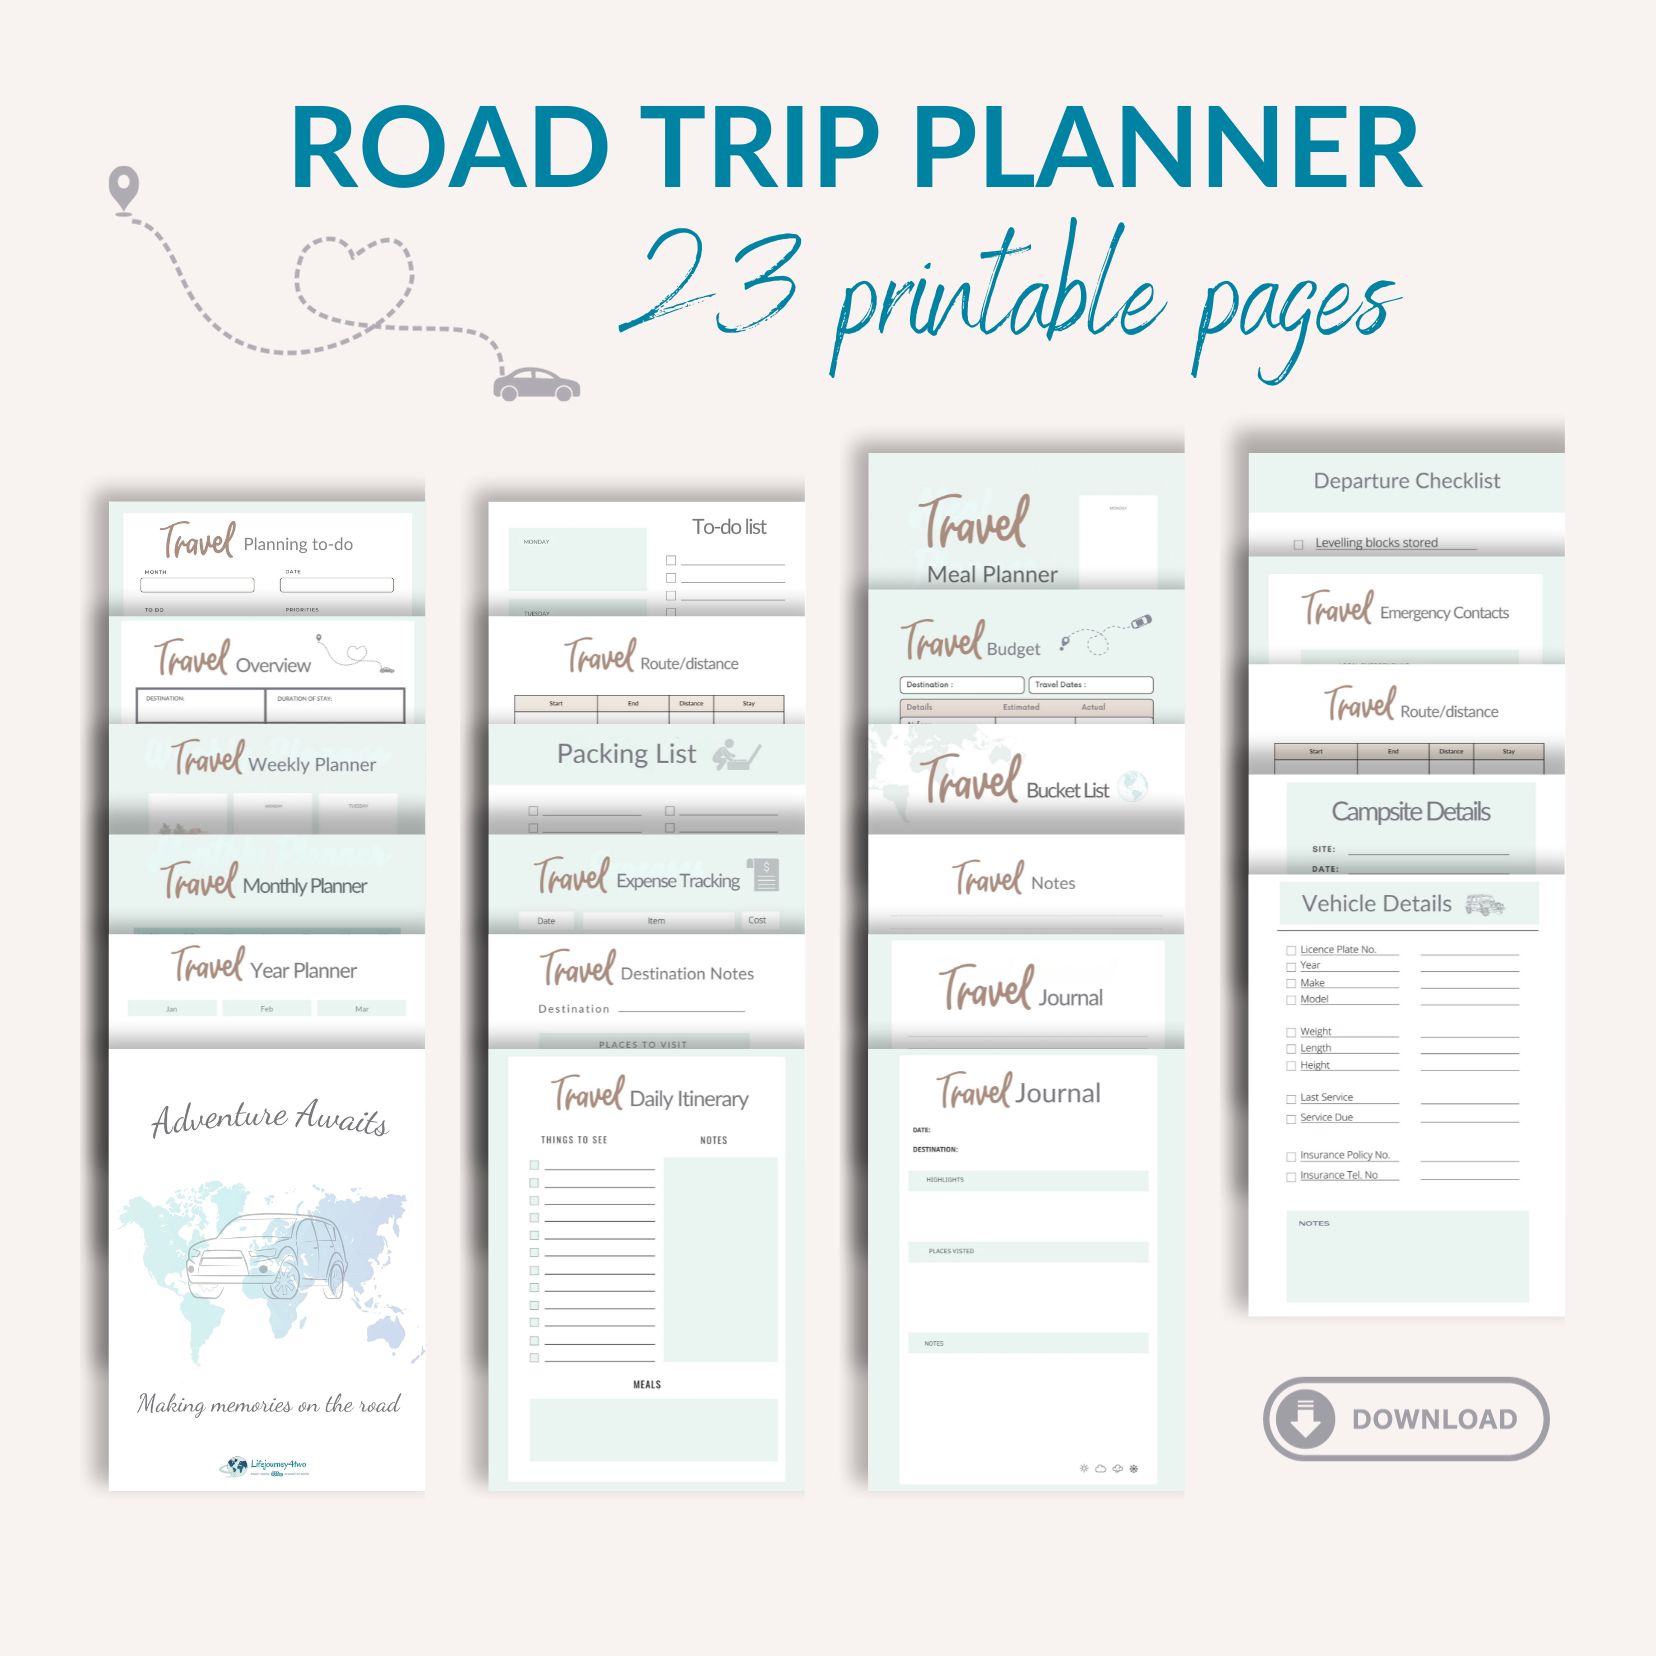 Road trip planner with car at front